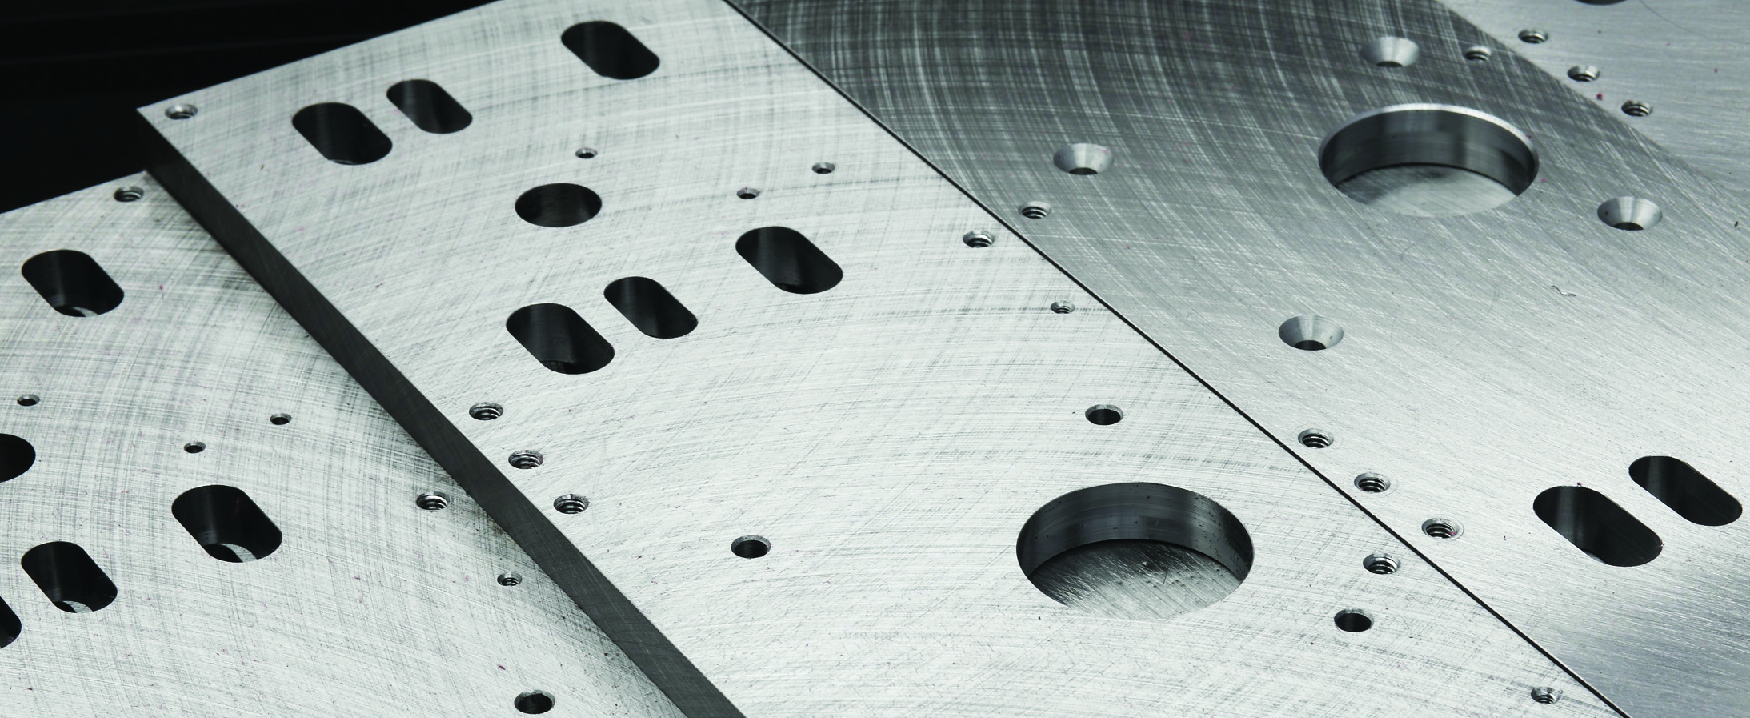 A picture of precision machined metal plates with many holes of differing sizes.